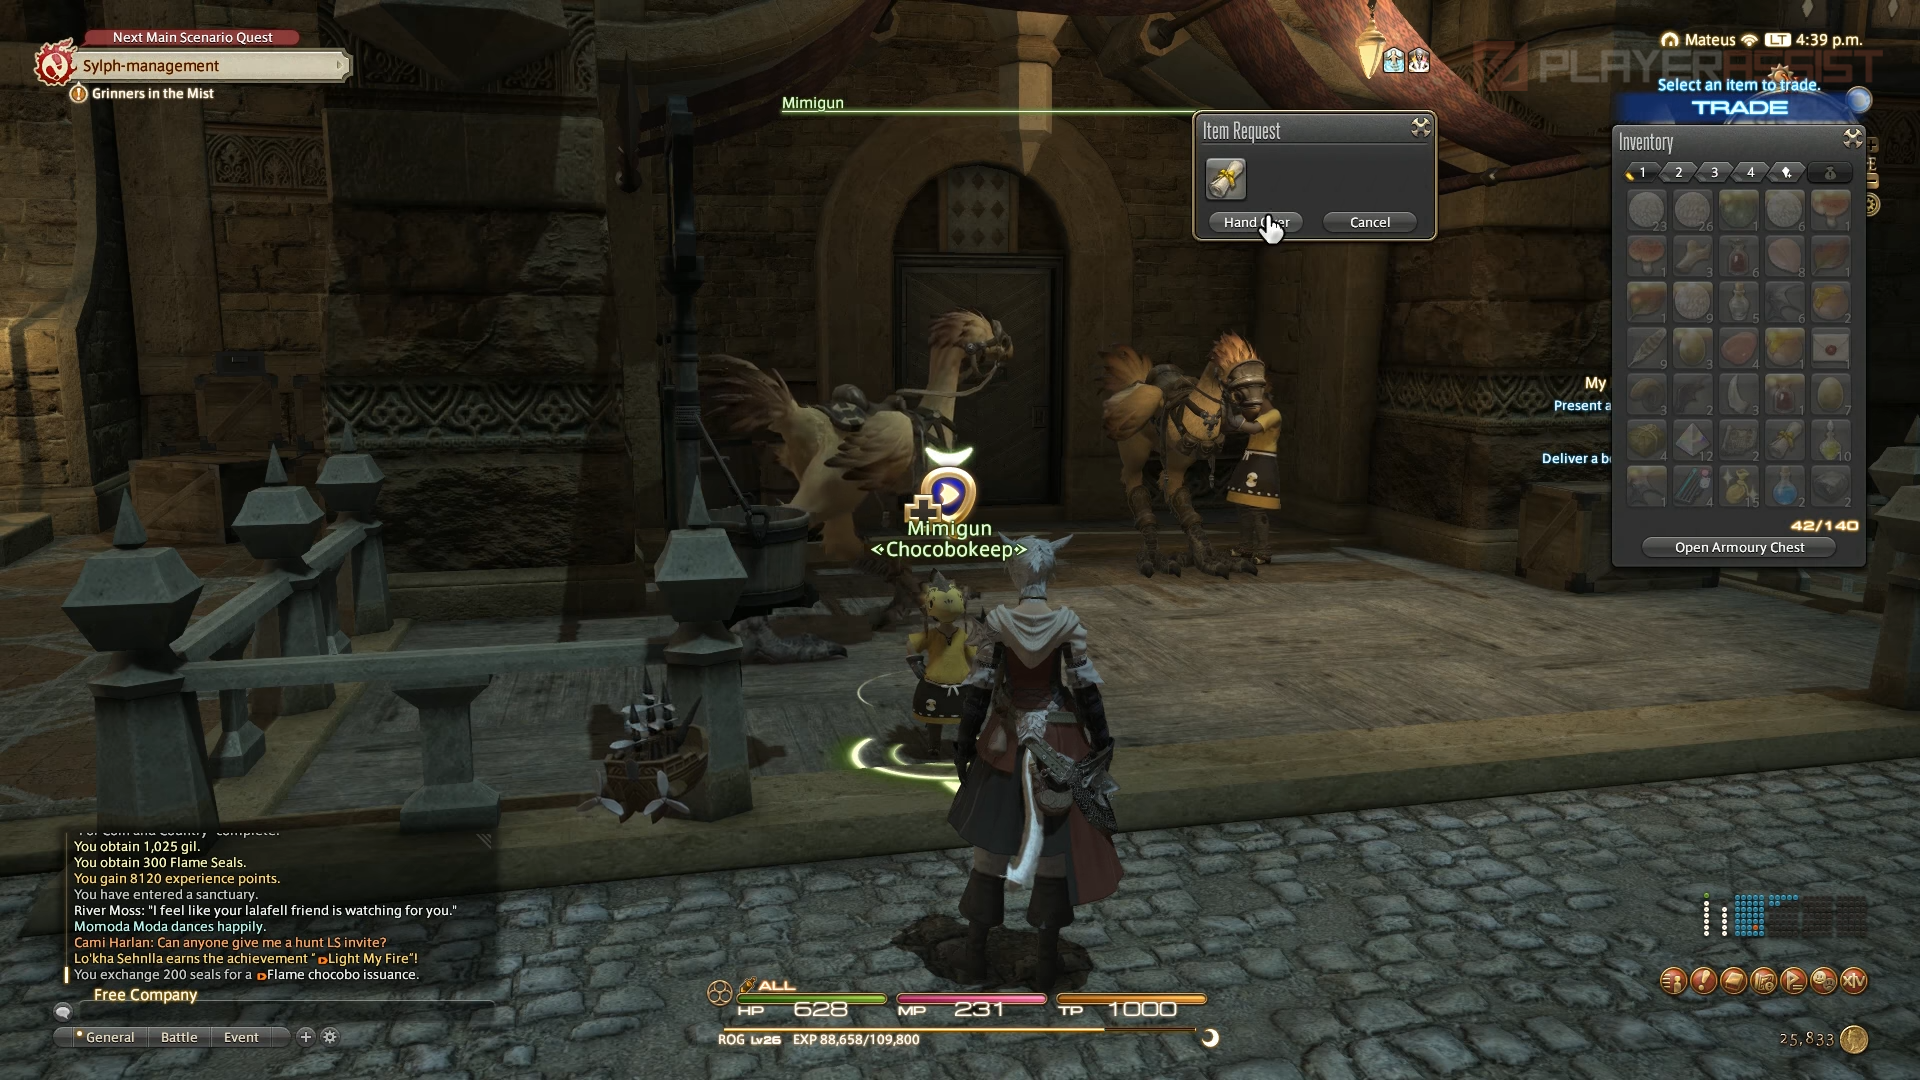 obtain the chocobo whistle